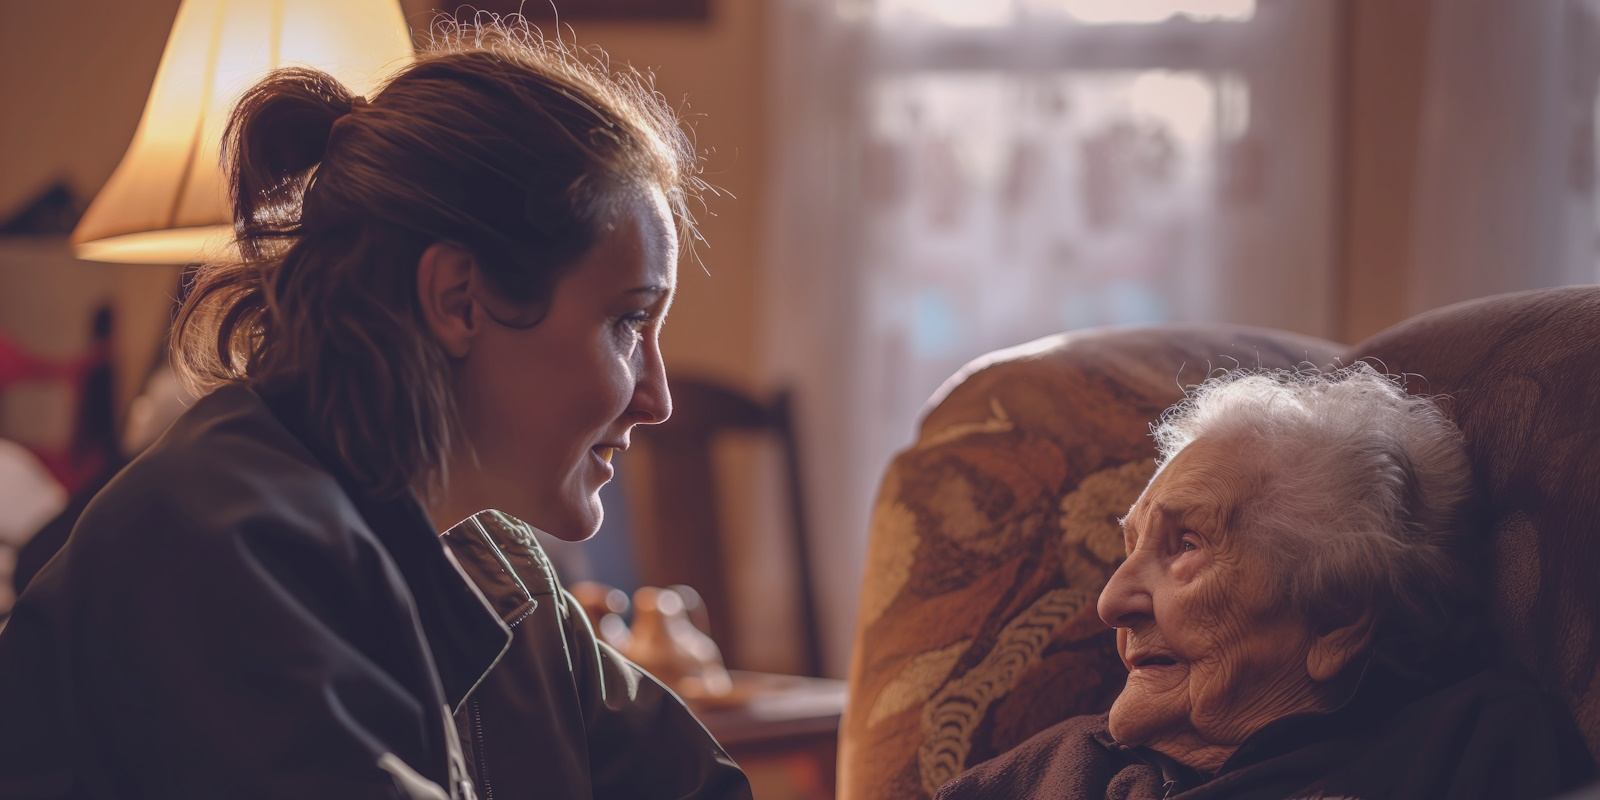 Is Live-in Care Right for You? A Guide to Home Care Options